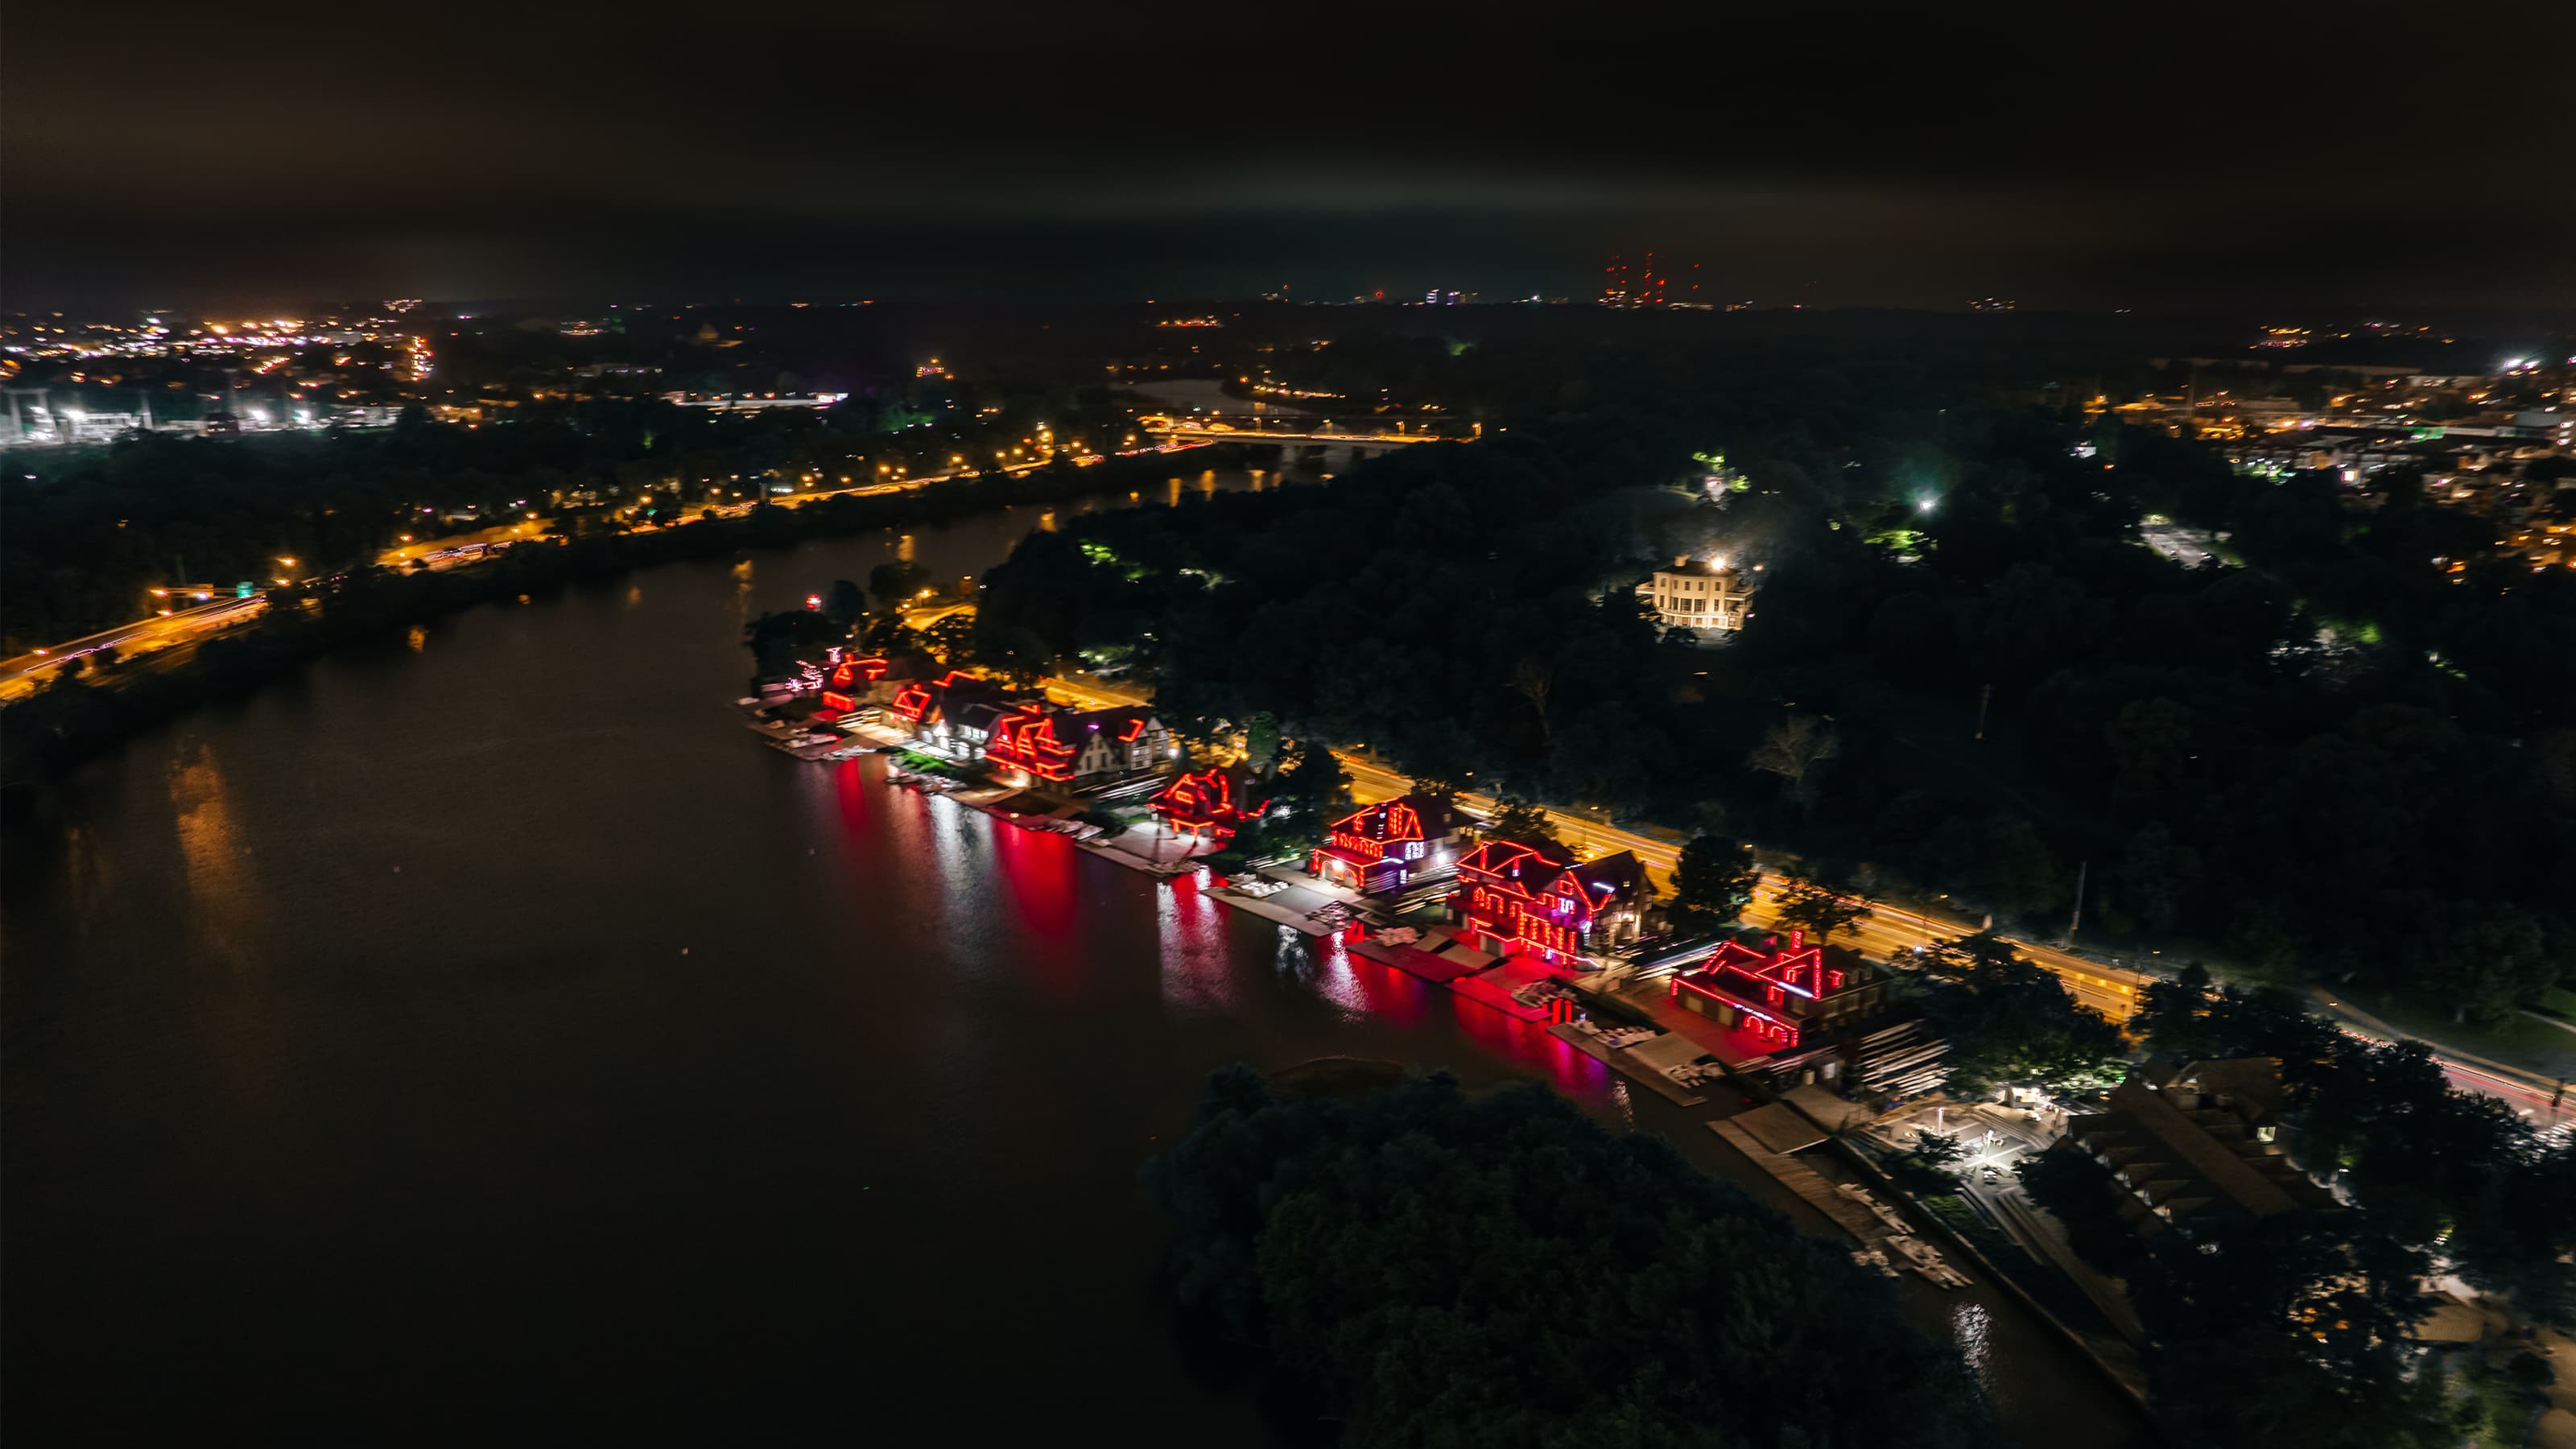 Boathouse row lit up in red